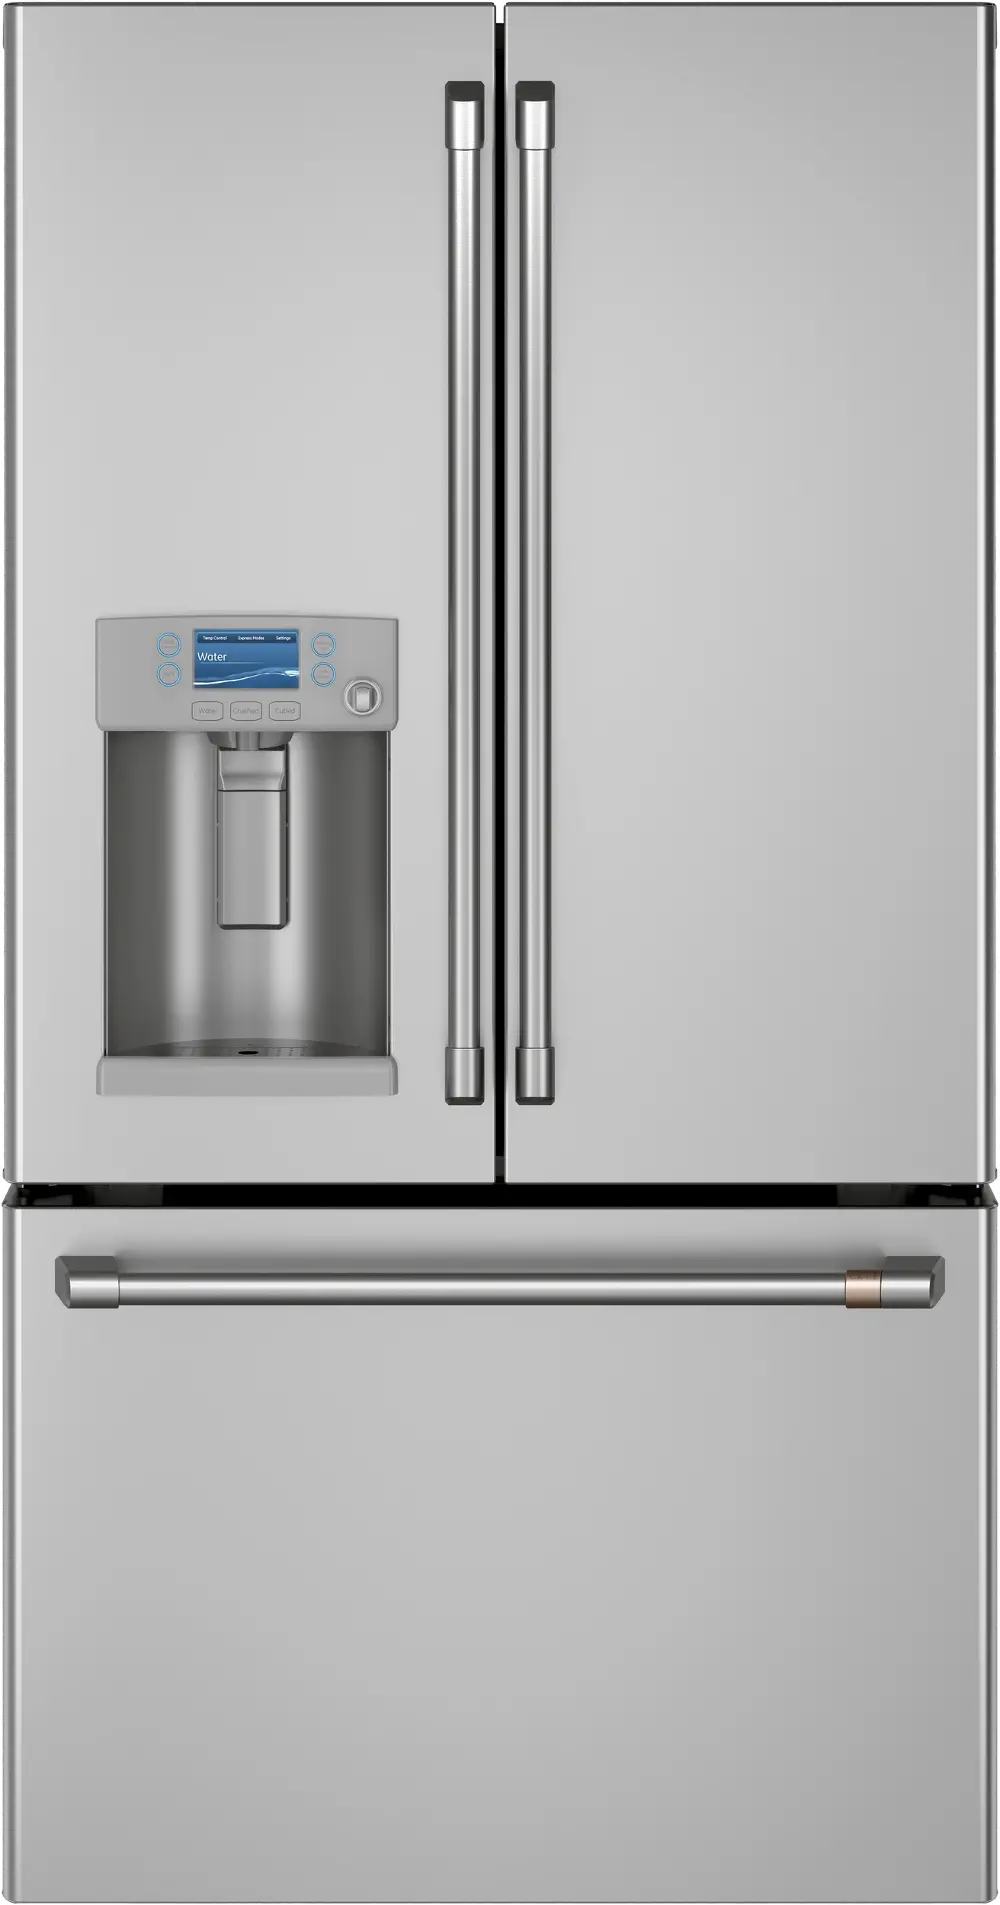 CFE28TP2MS1 Cafe 27.8 cu ft French Door Refrigerator - Stainless Steel-1